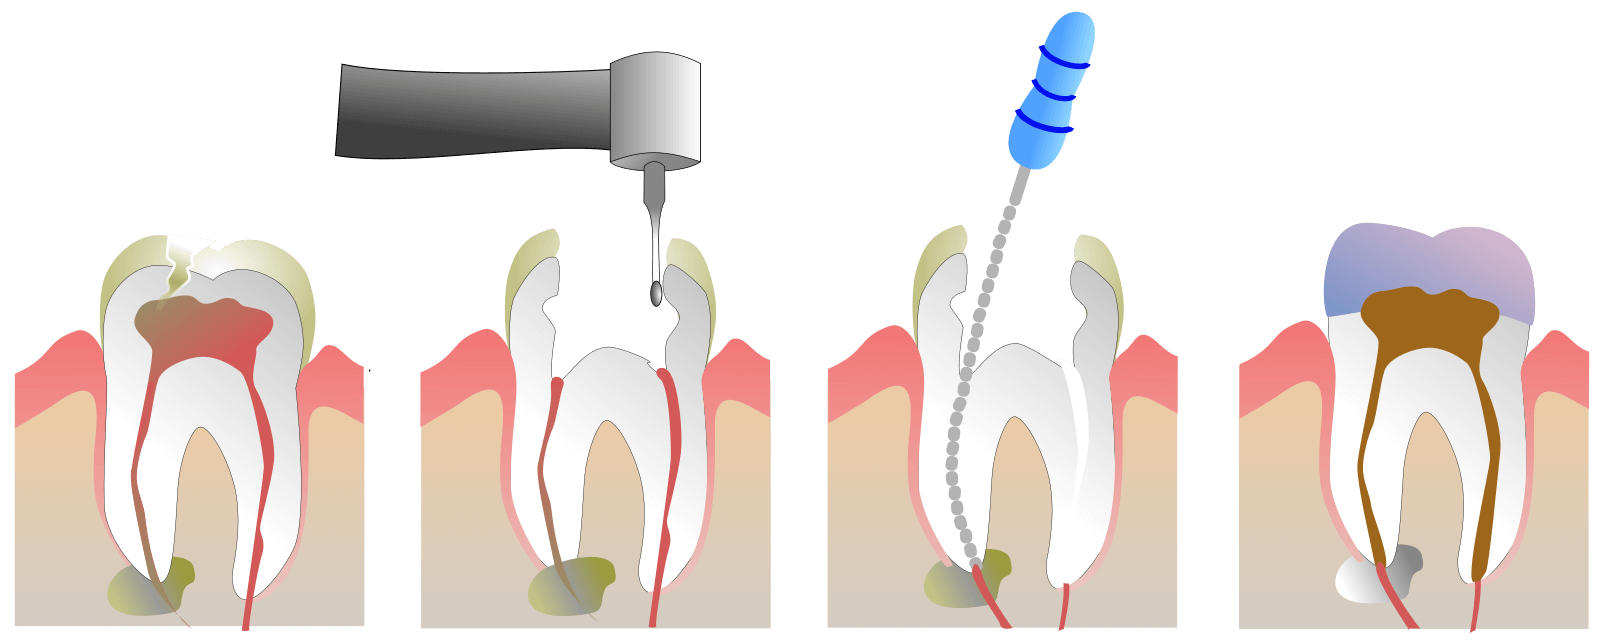 A diagram showing steps of root canal procedure